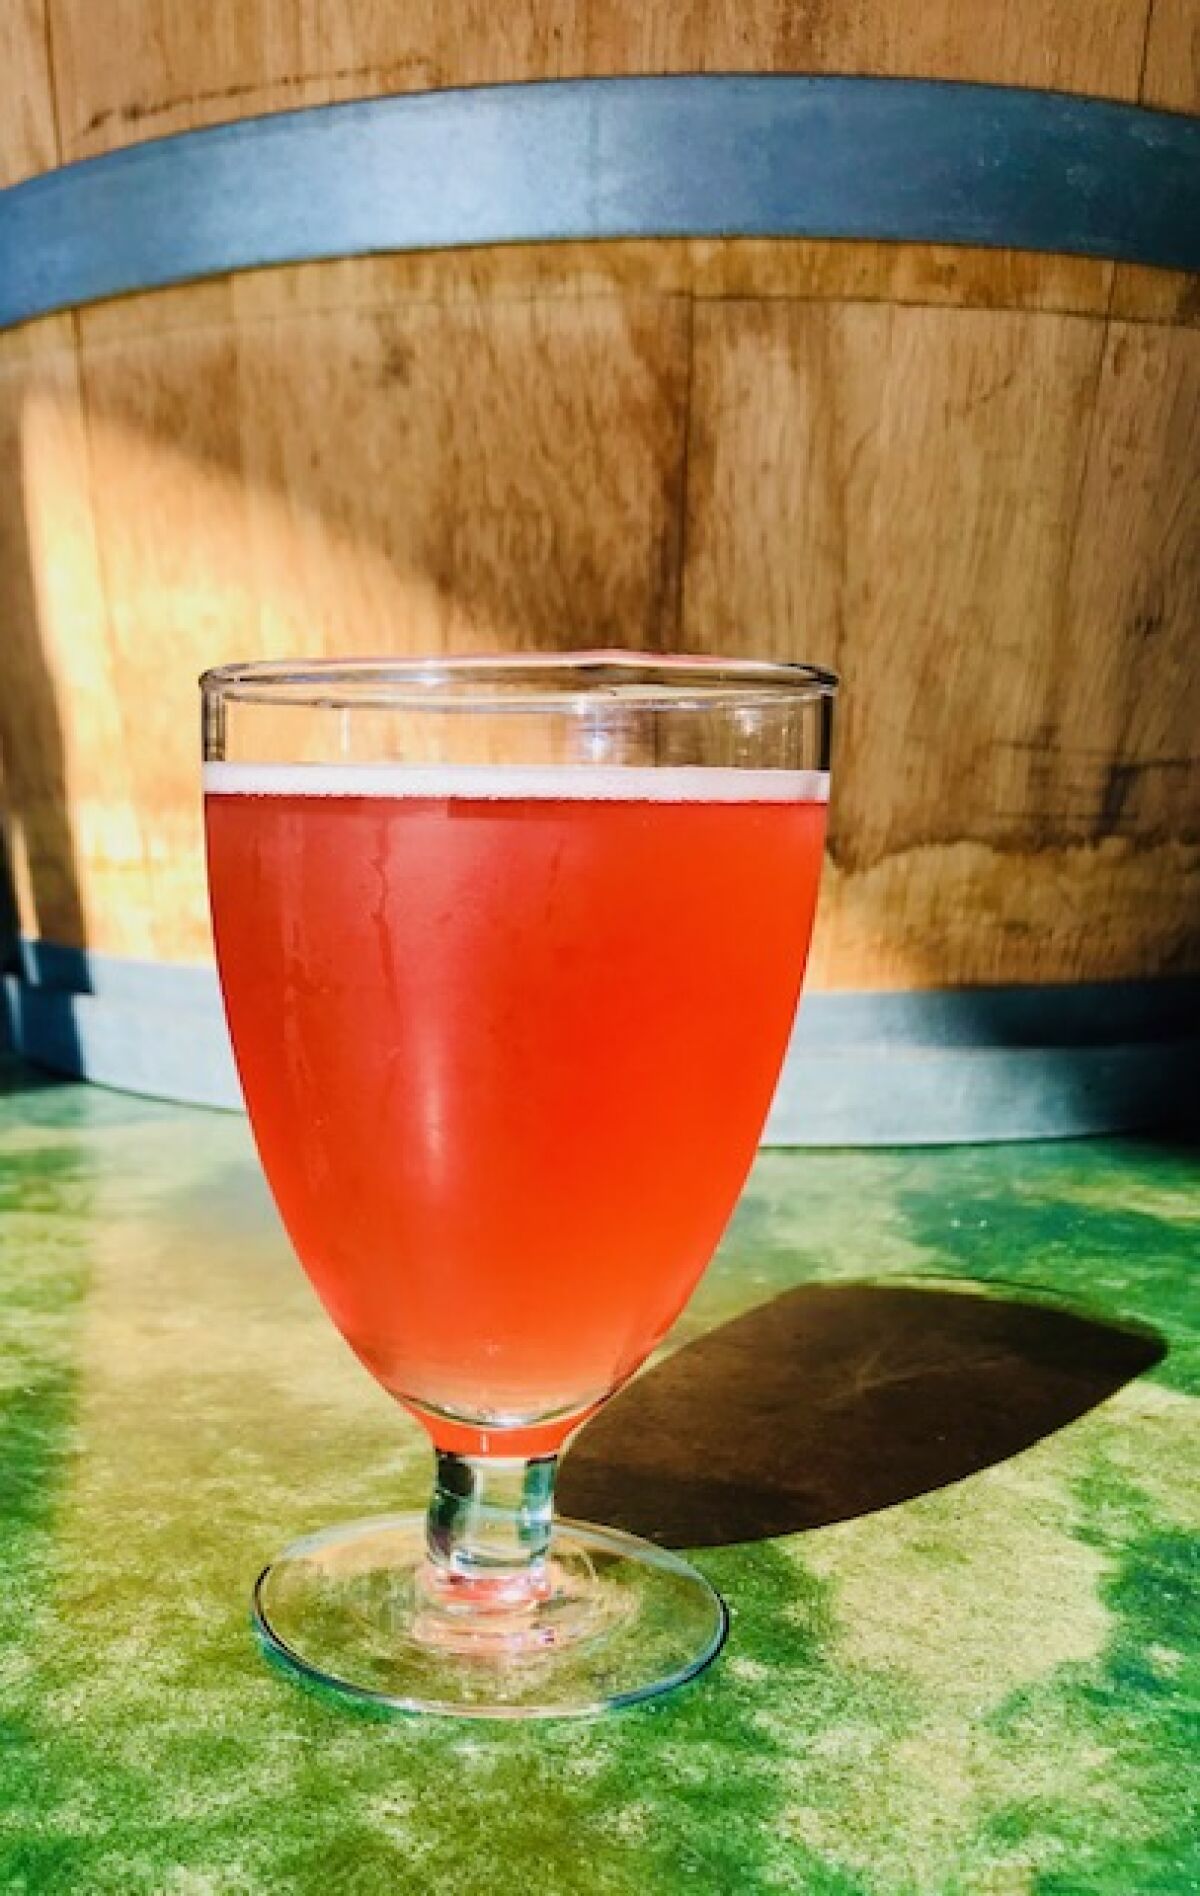 One of Bootstrap's current Reboot flavors is Oak-aged Tart Cherry, which has a 5.5 percent ABV